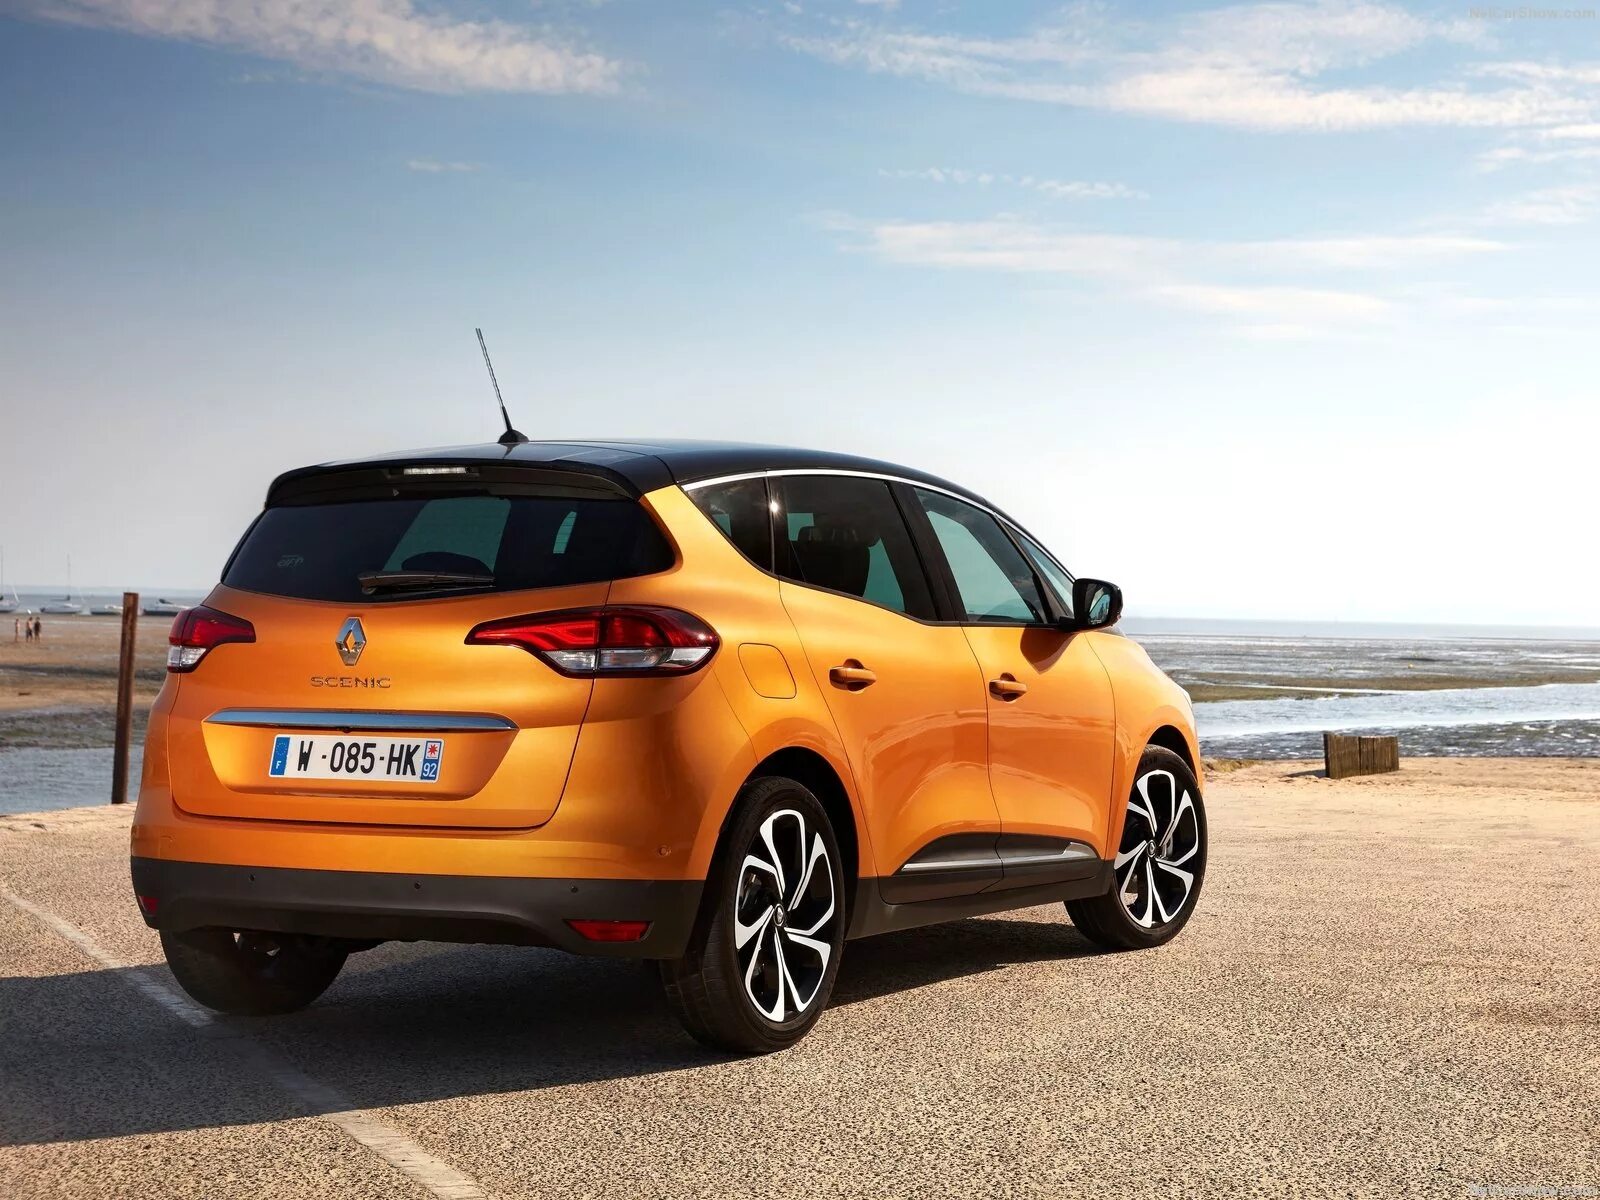 Renault Scenic. Renault Scénic фото новый. Renault Scenic фото 2020. Рено Сценик 2018 фото.